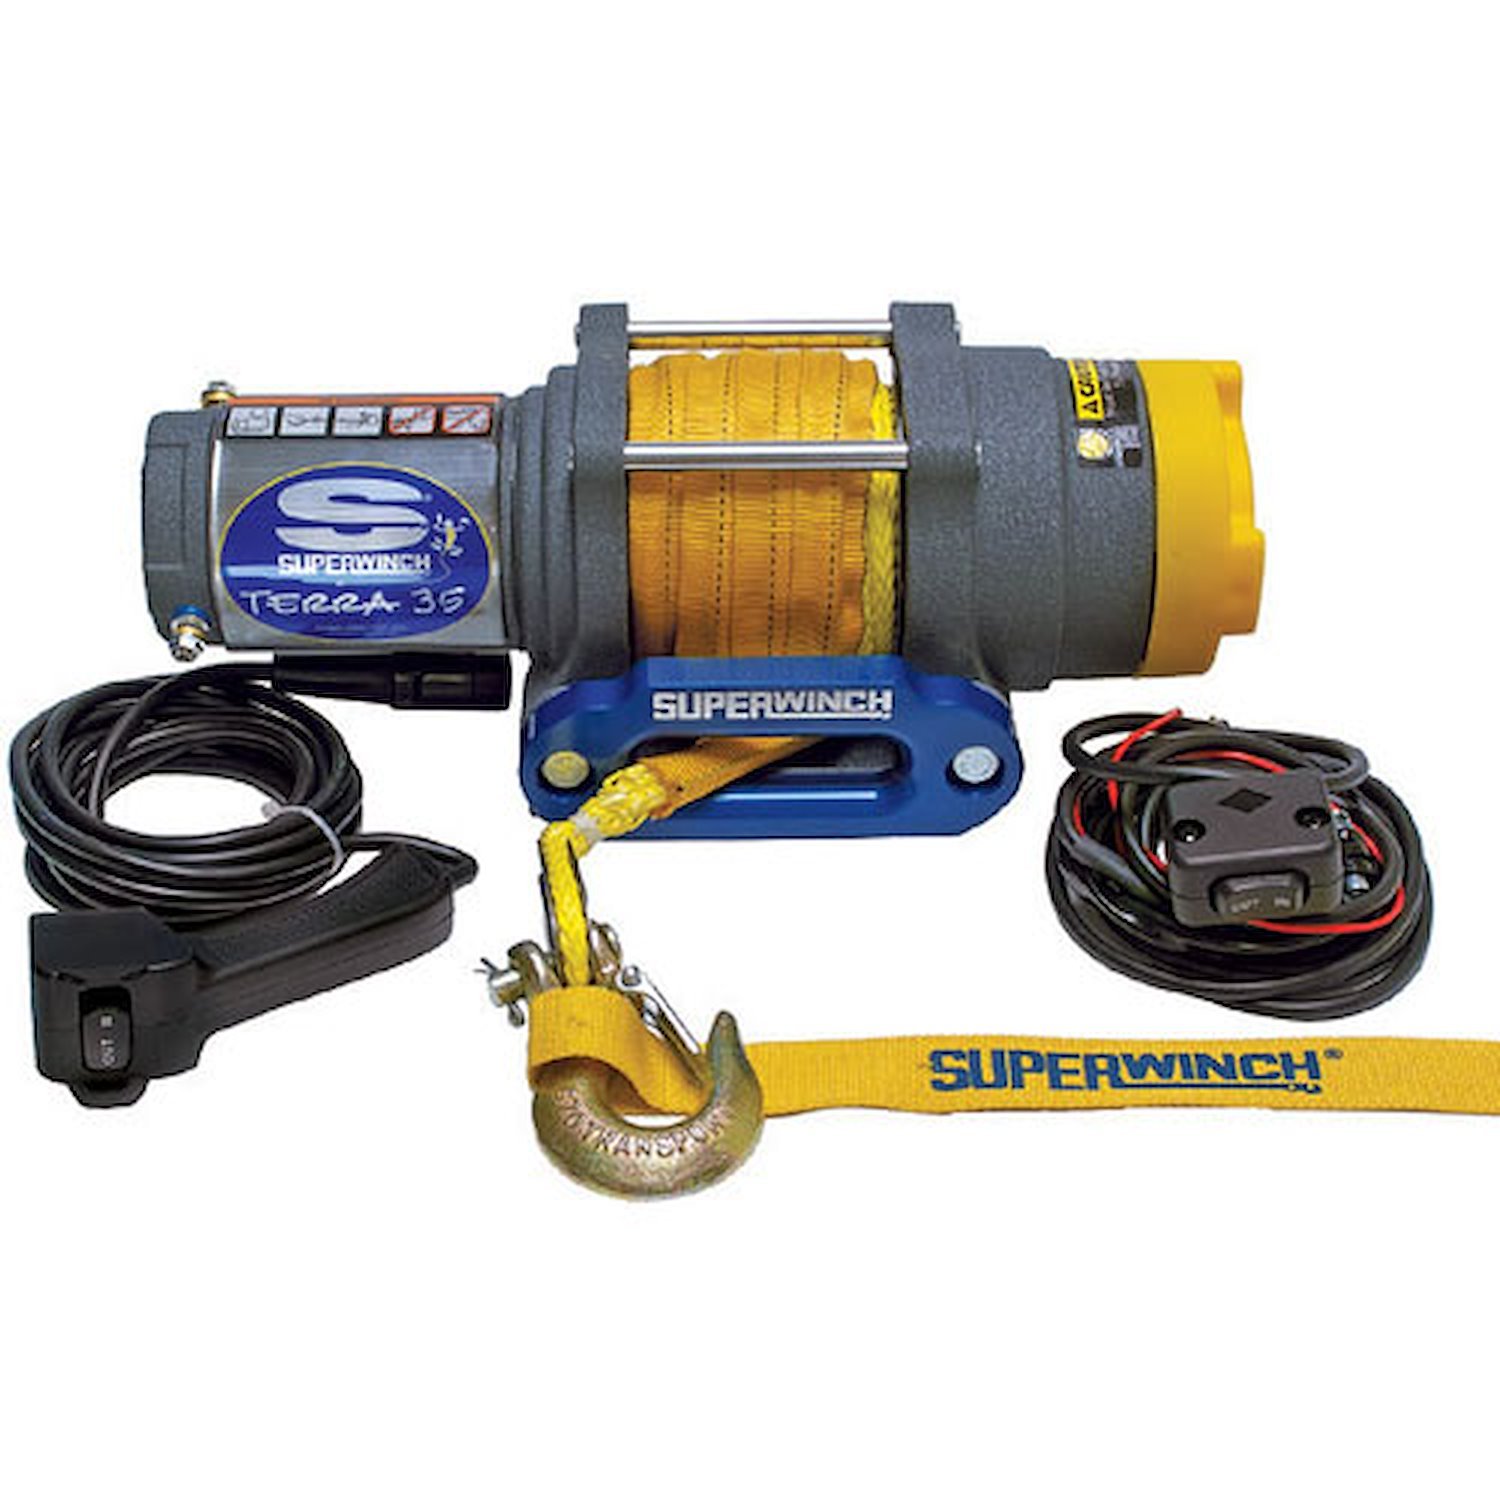 Terra 35SR Winch Rated Line Pull 3,500-lb.